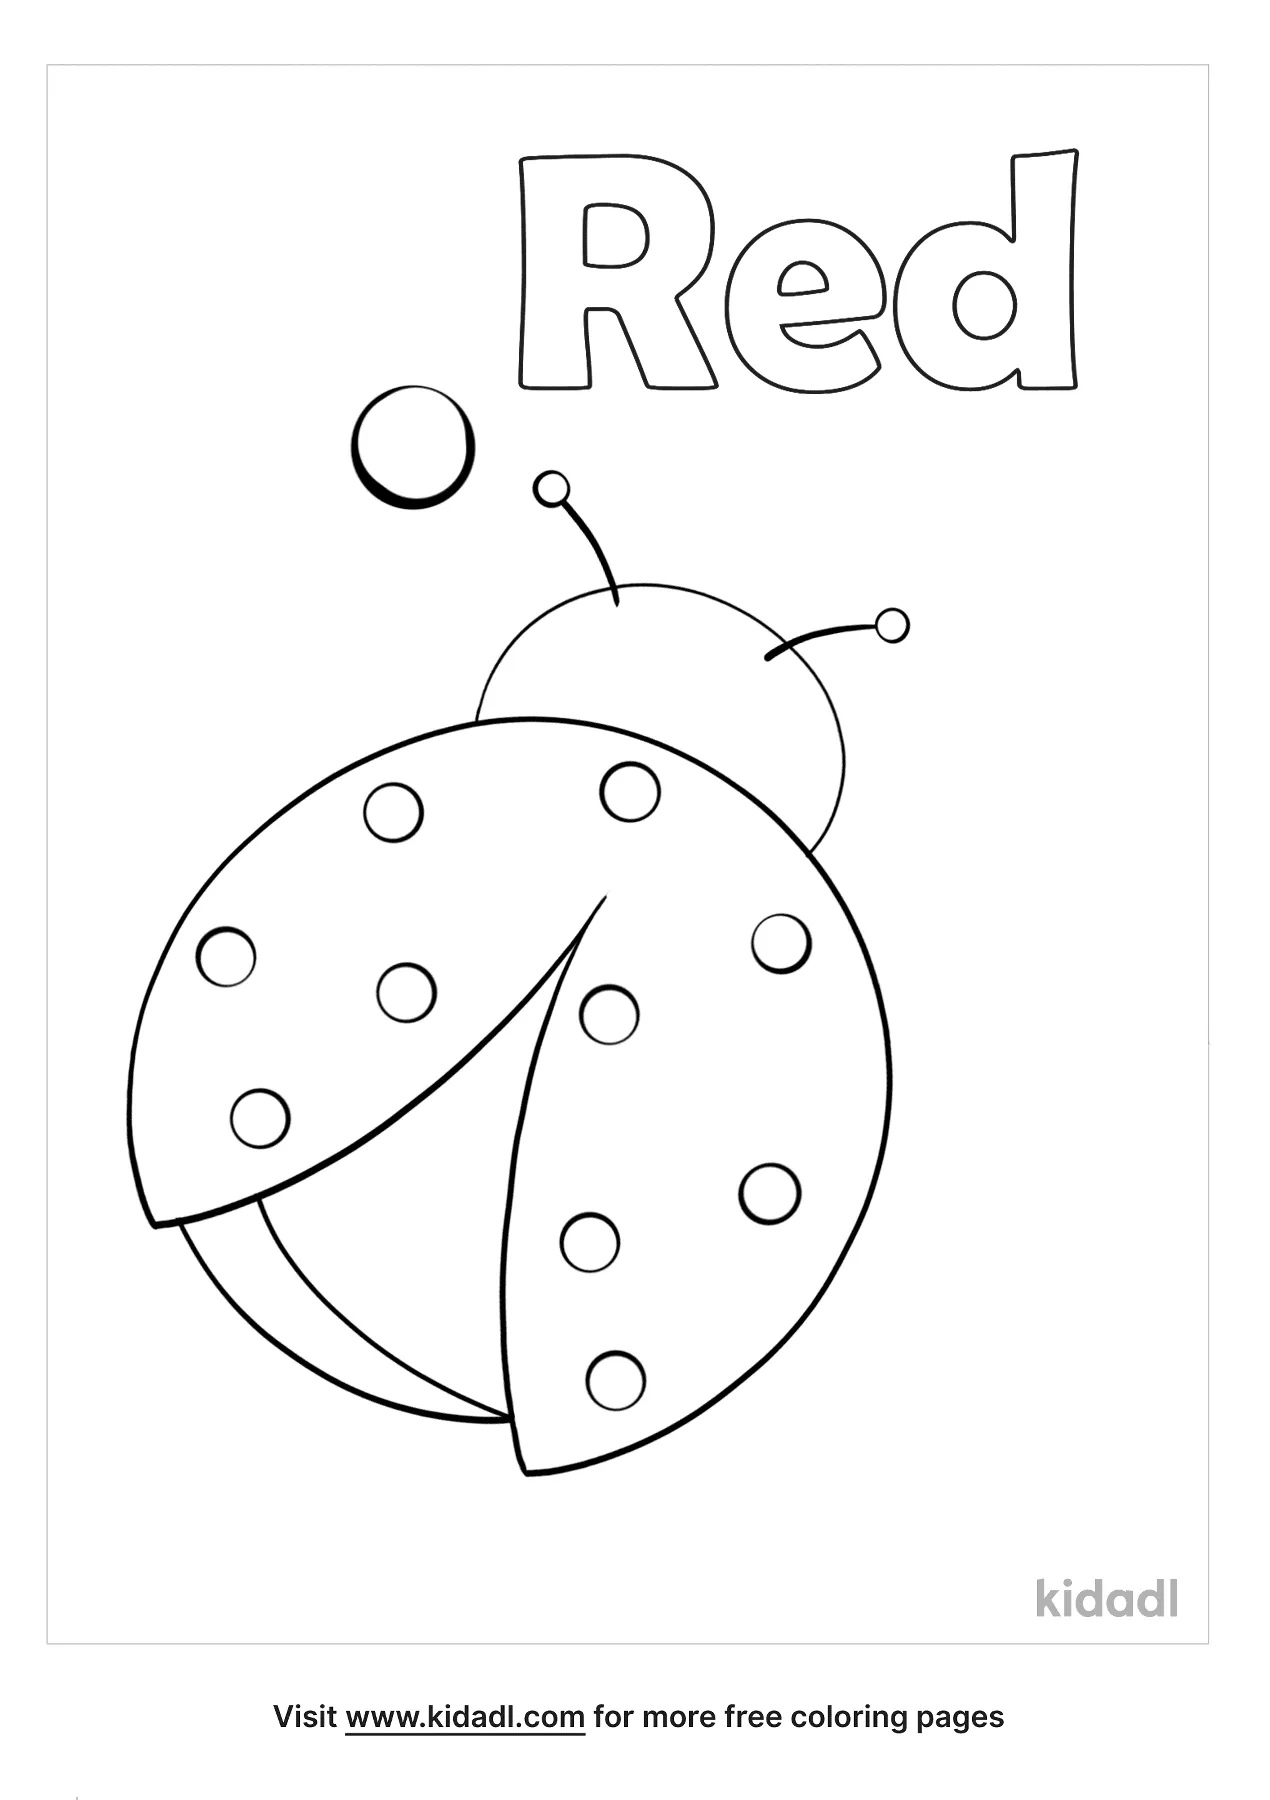 color red coloring pages